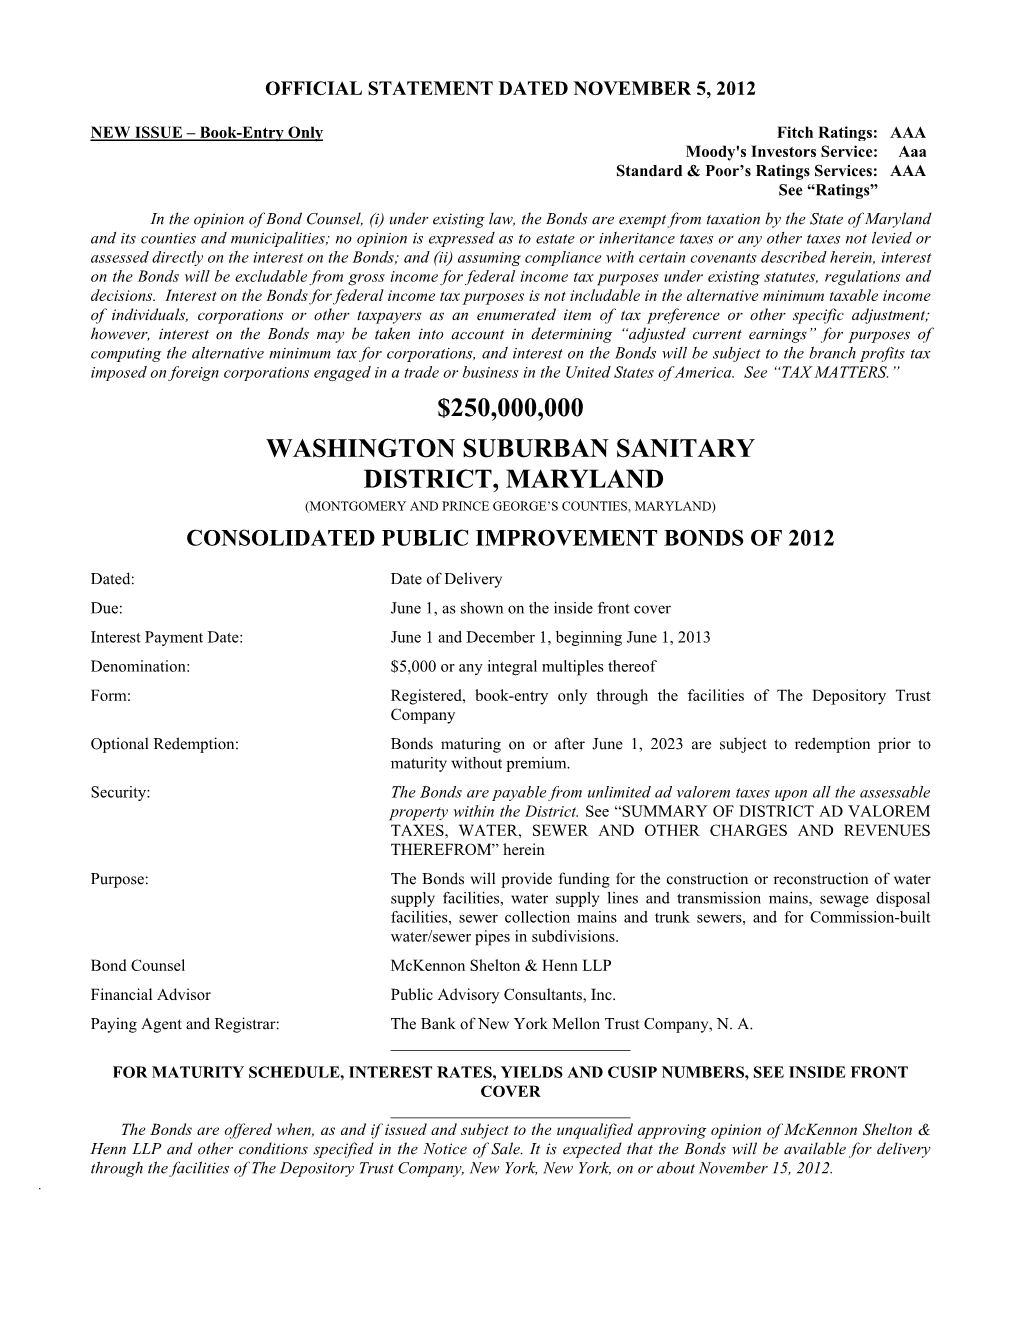 $250,000,000 Washington Suburban Sanitary District, Maryland (Montgomery and Prince George’S Counties, Maryland) Consolidated Public Improvement Bonds of 2012